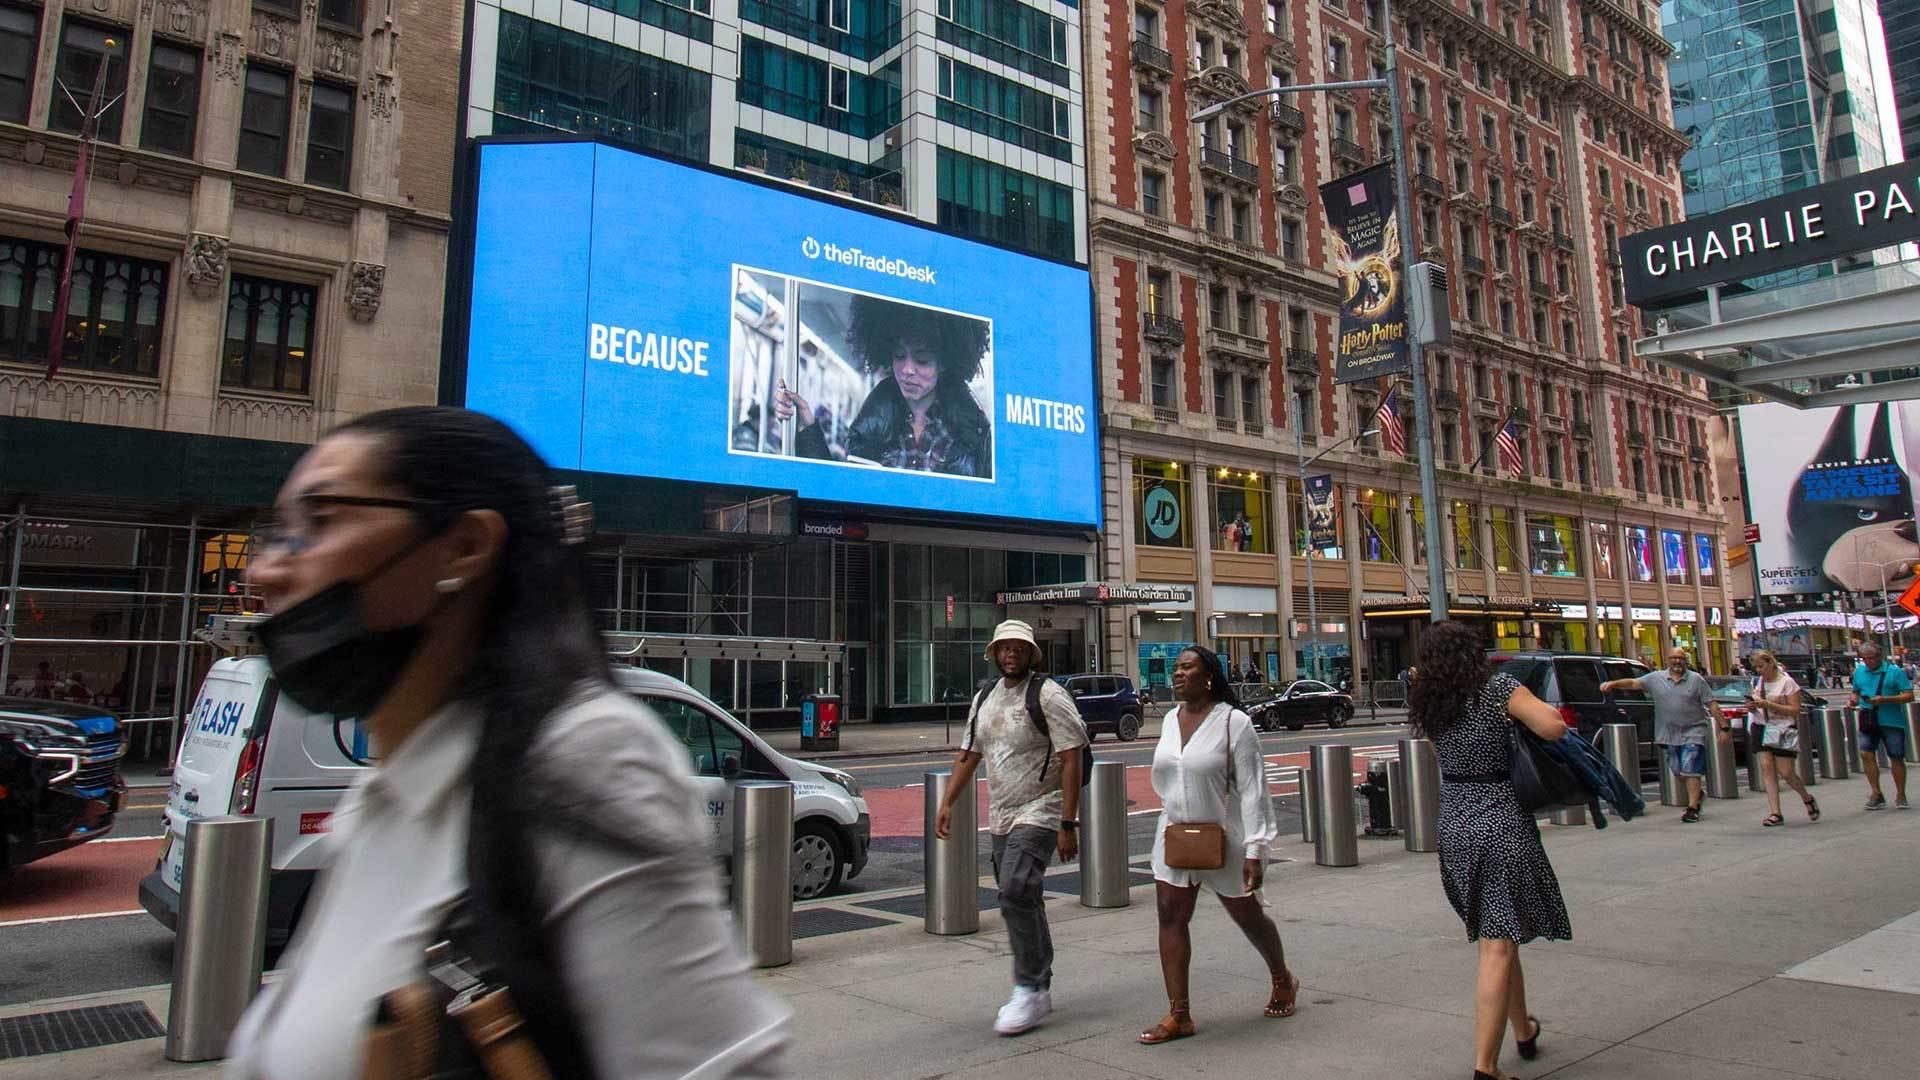 Digital ad for The Trade Desk outside of a building in New York City